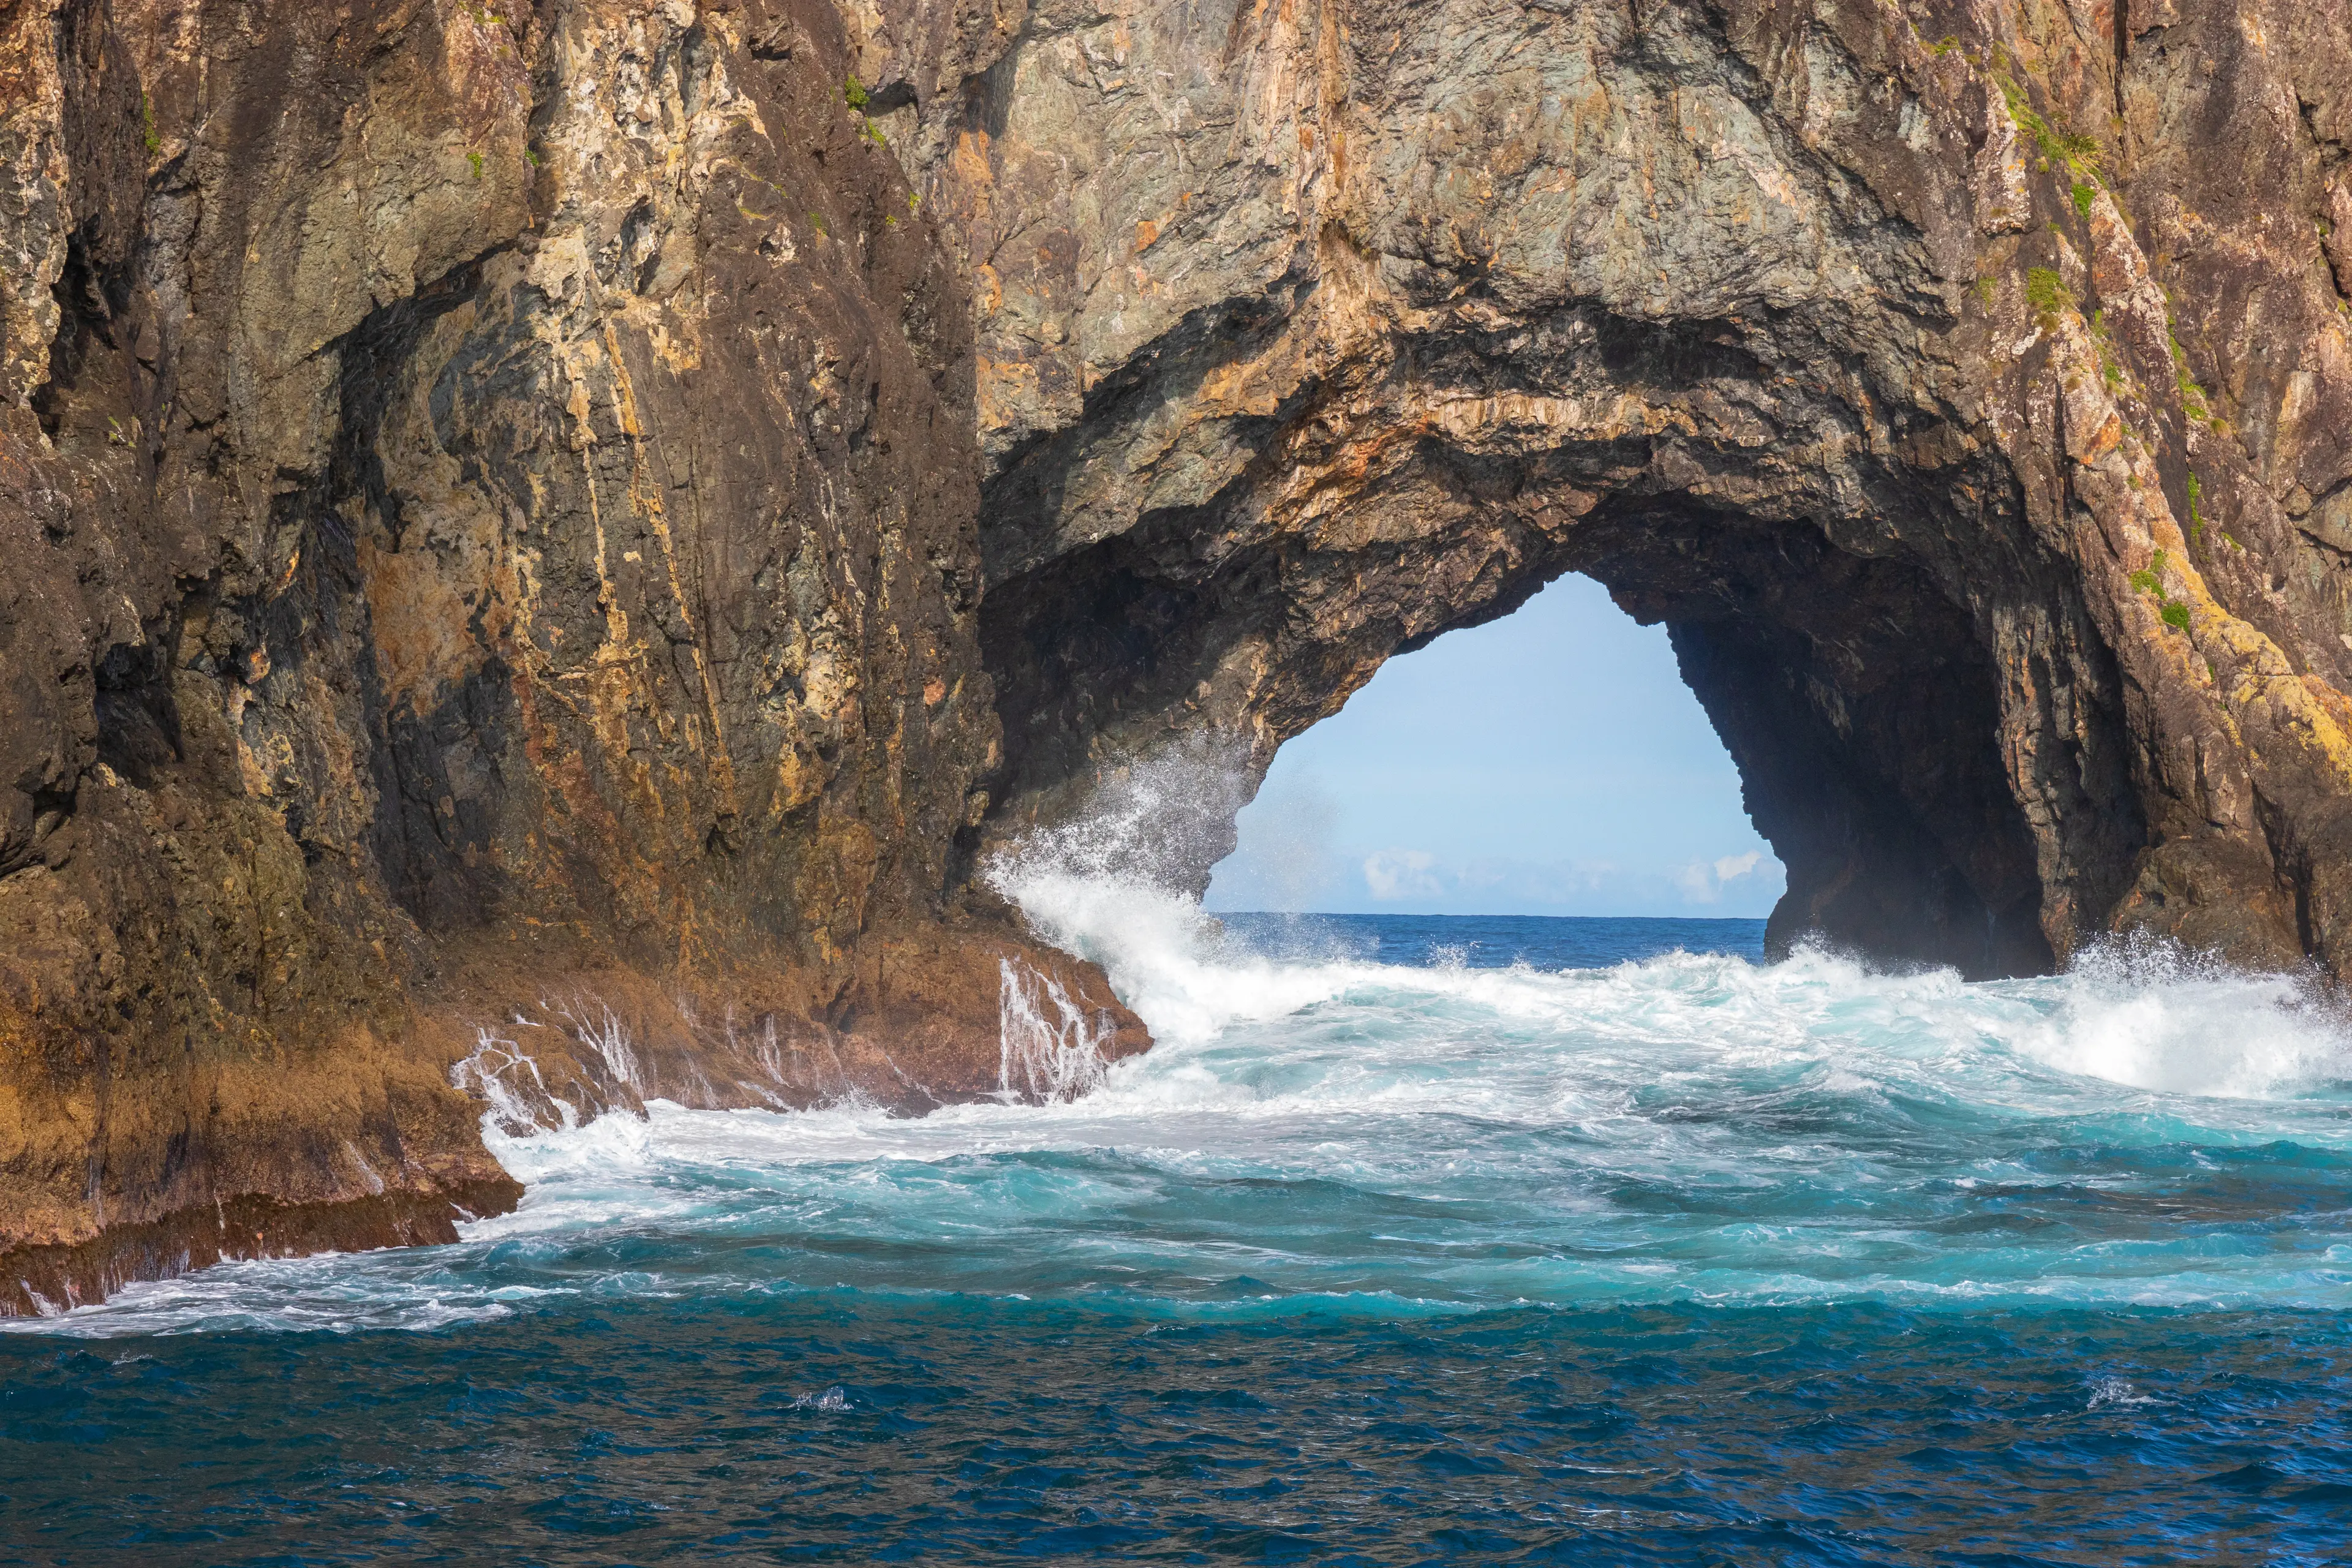 Hole in the Rock, a popular natural attraction